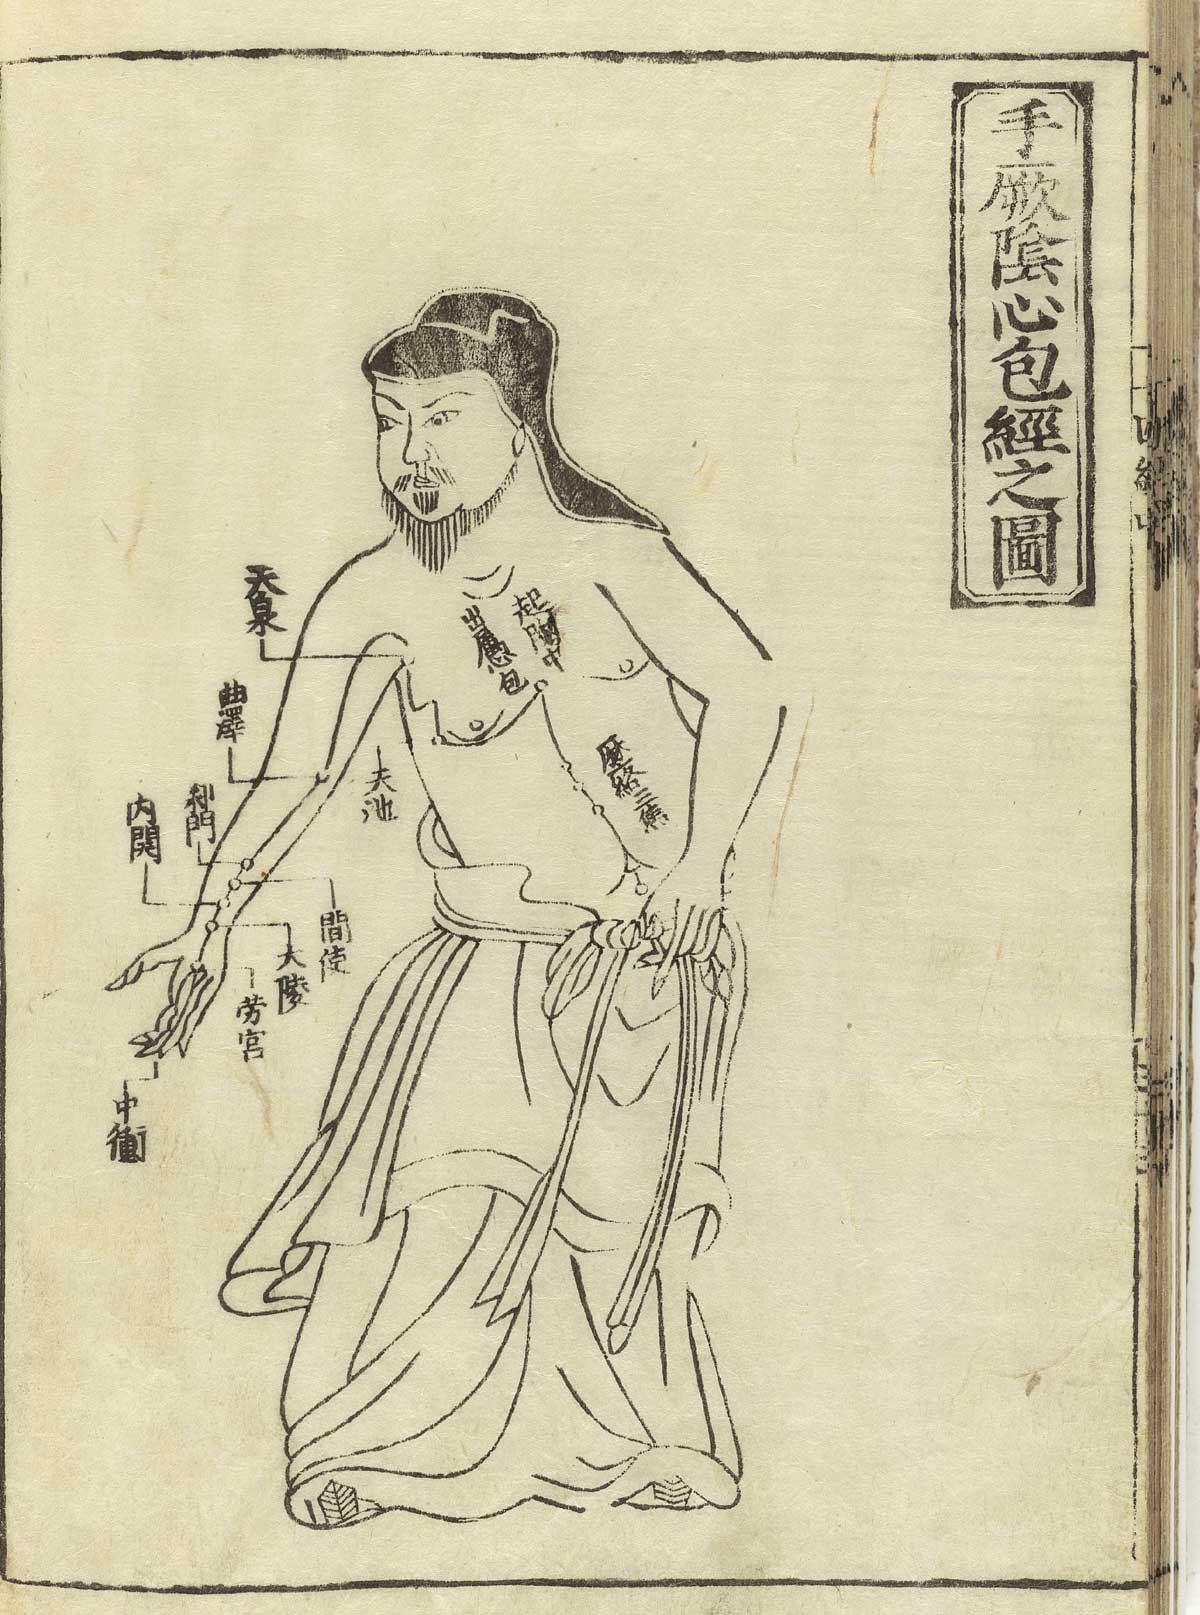 Woodcut showing the Jueyin pericardium meridian of hand of a standing male facing figure wearing a loin cloth with meridians indicated down the chest and arm with Chinese characters giving names of the points, from Hua Shou’s Jushikei hakki, NLM Call no.: WZ 260 H868s 1716.